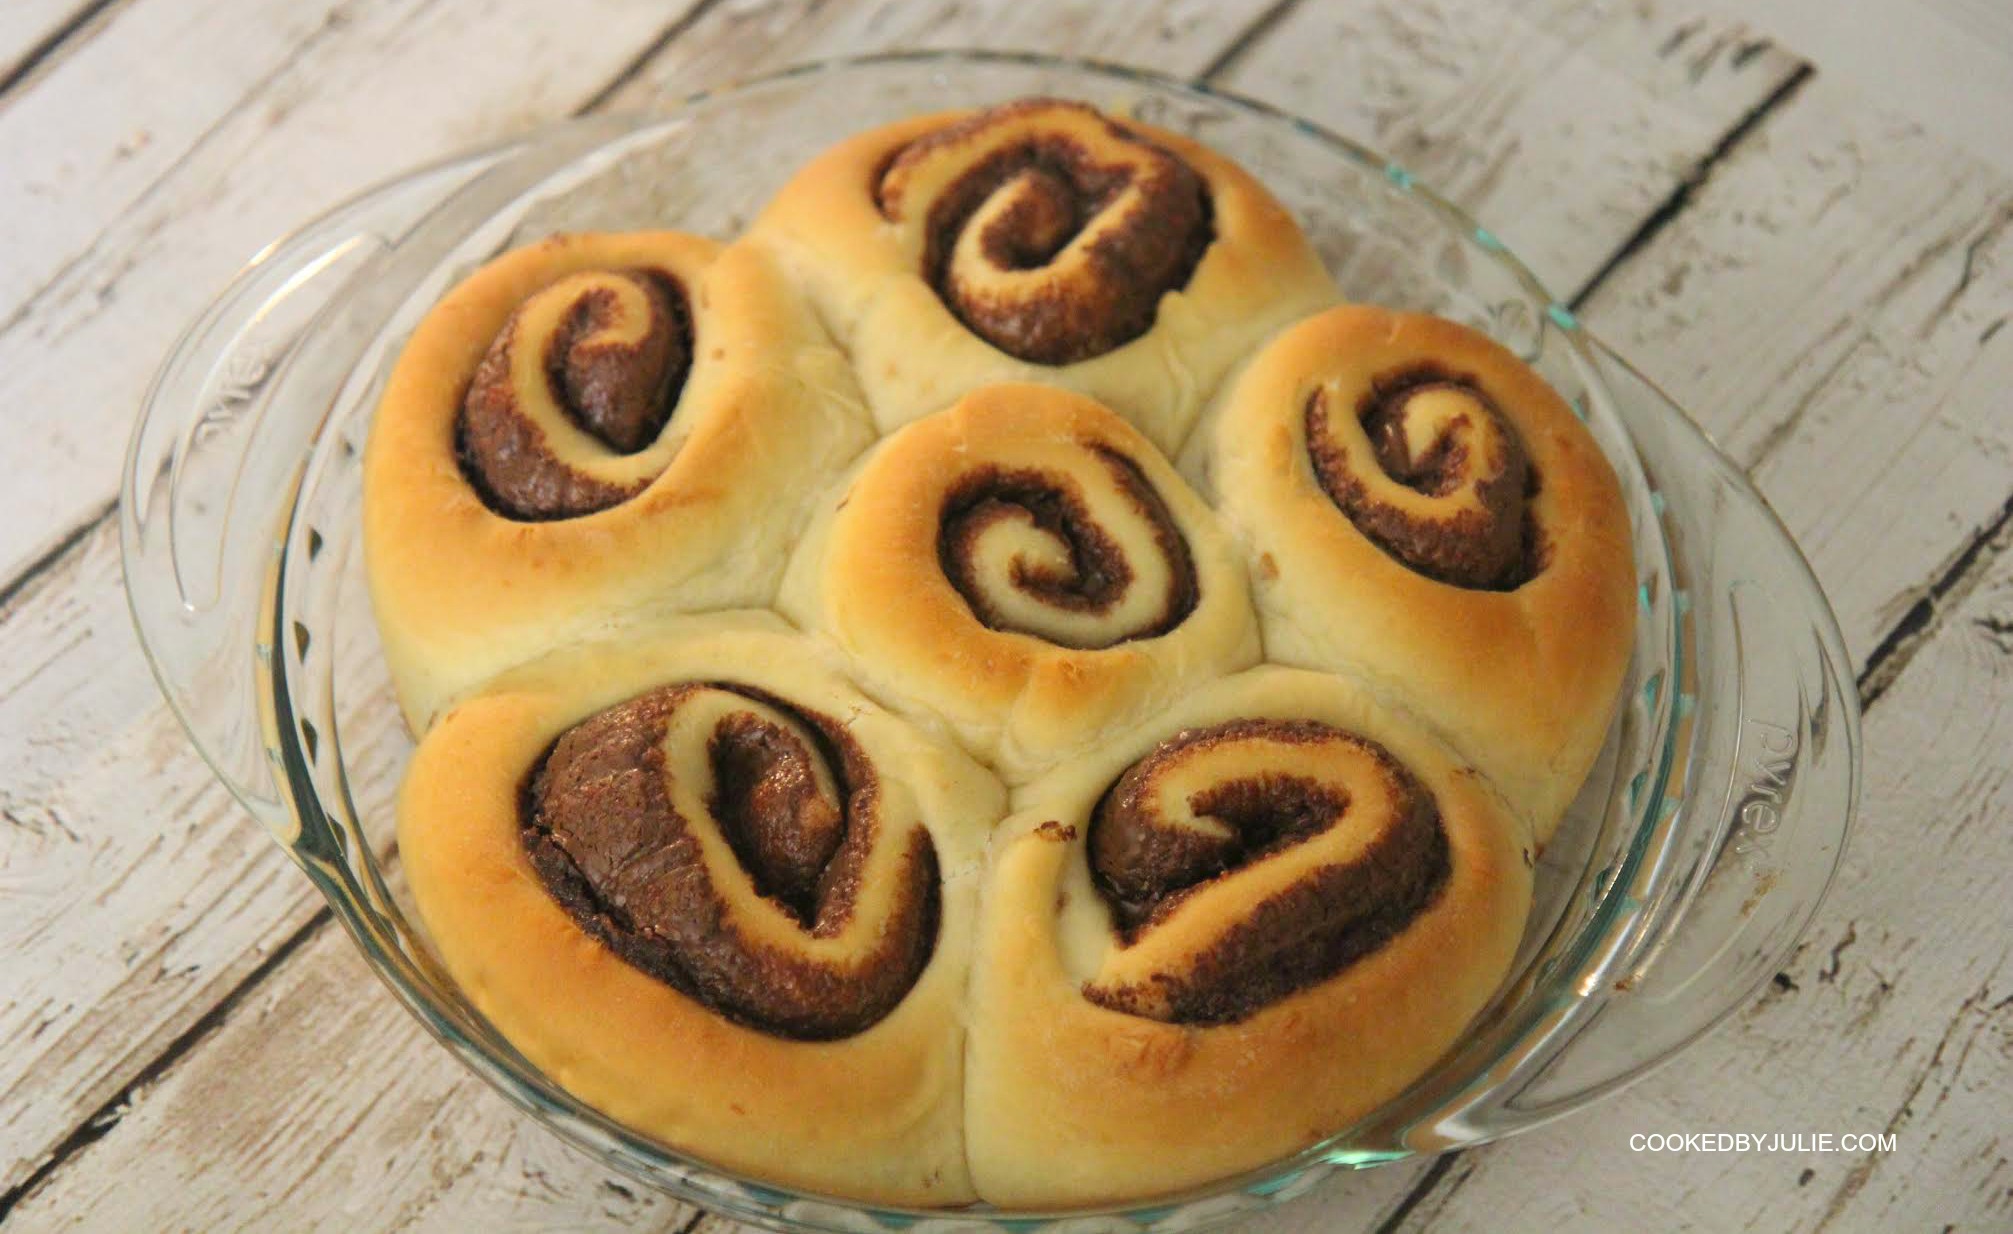 These Nutella cinnamon rolls are perfect for a weekend breakfast and go great paired with a cold glass of milk